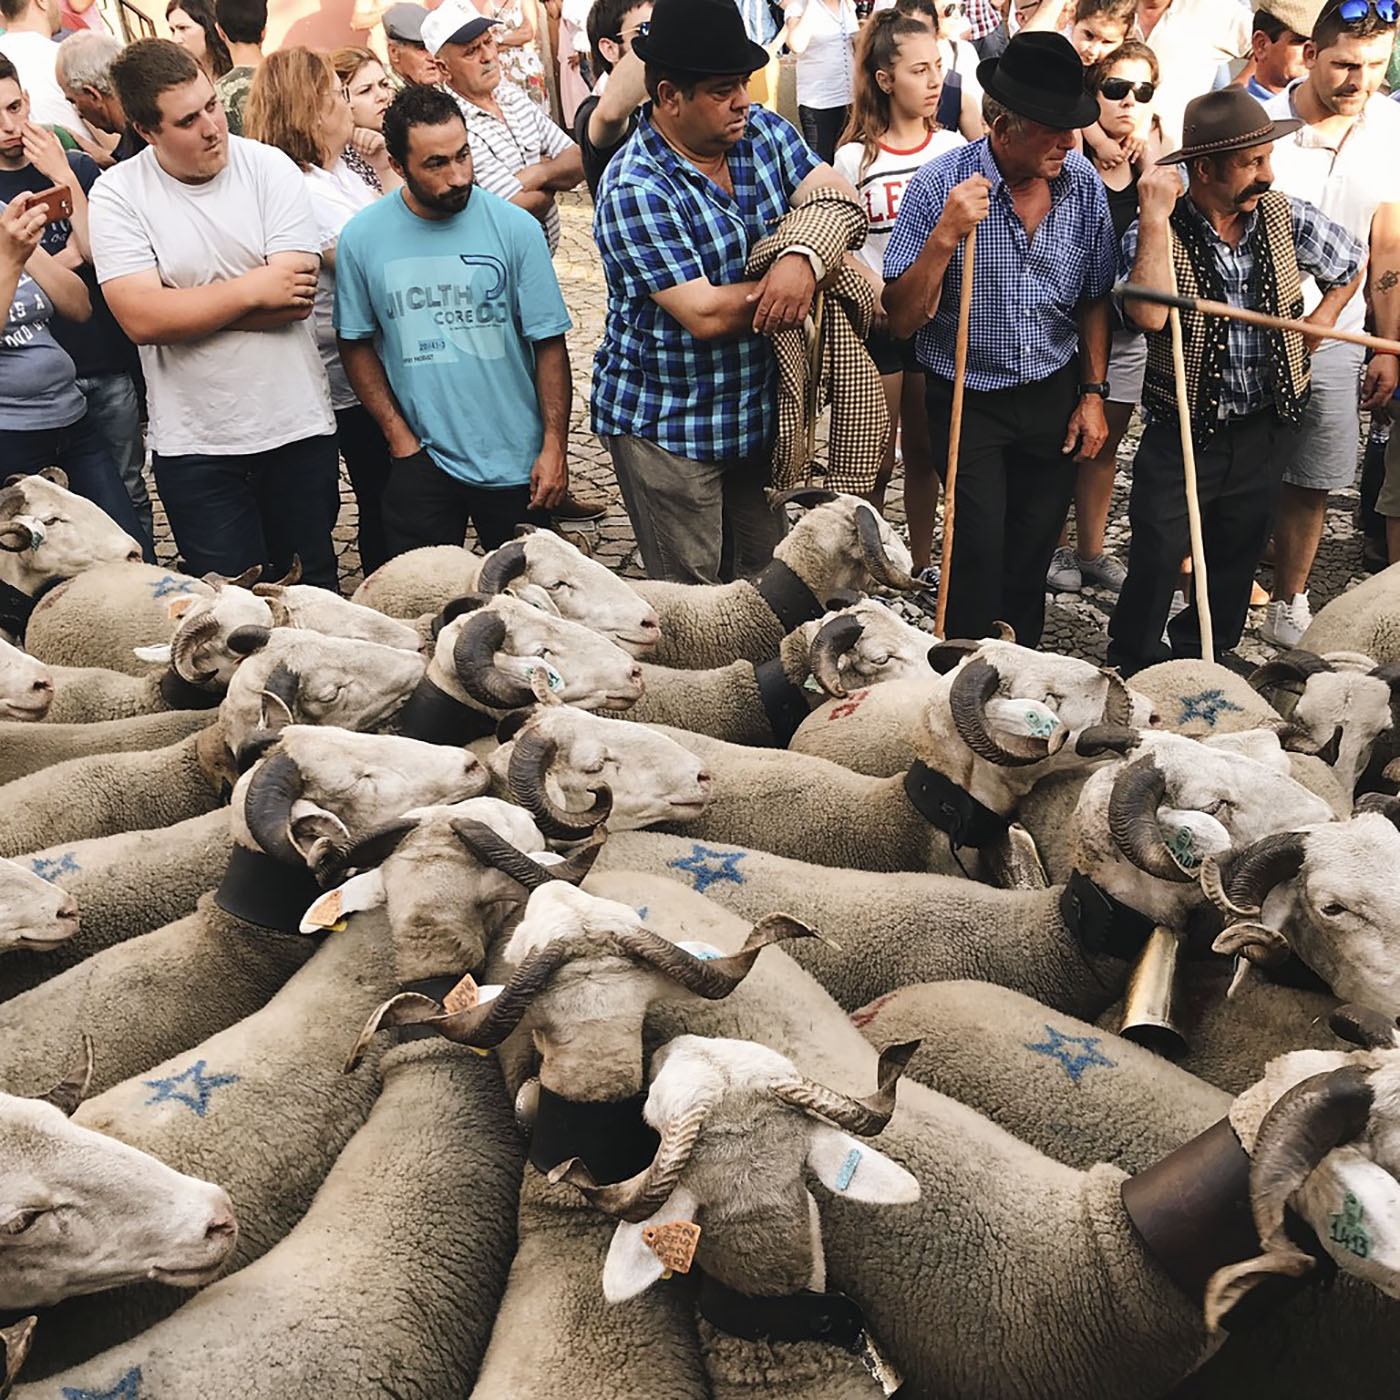 Sheep blessing ceremony in Portugal